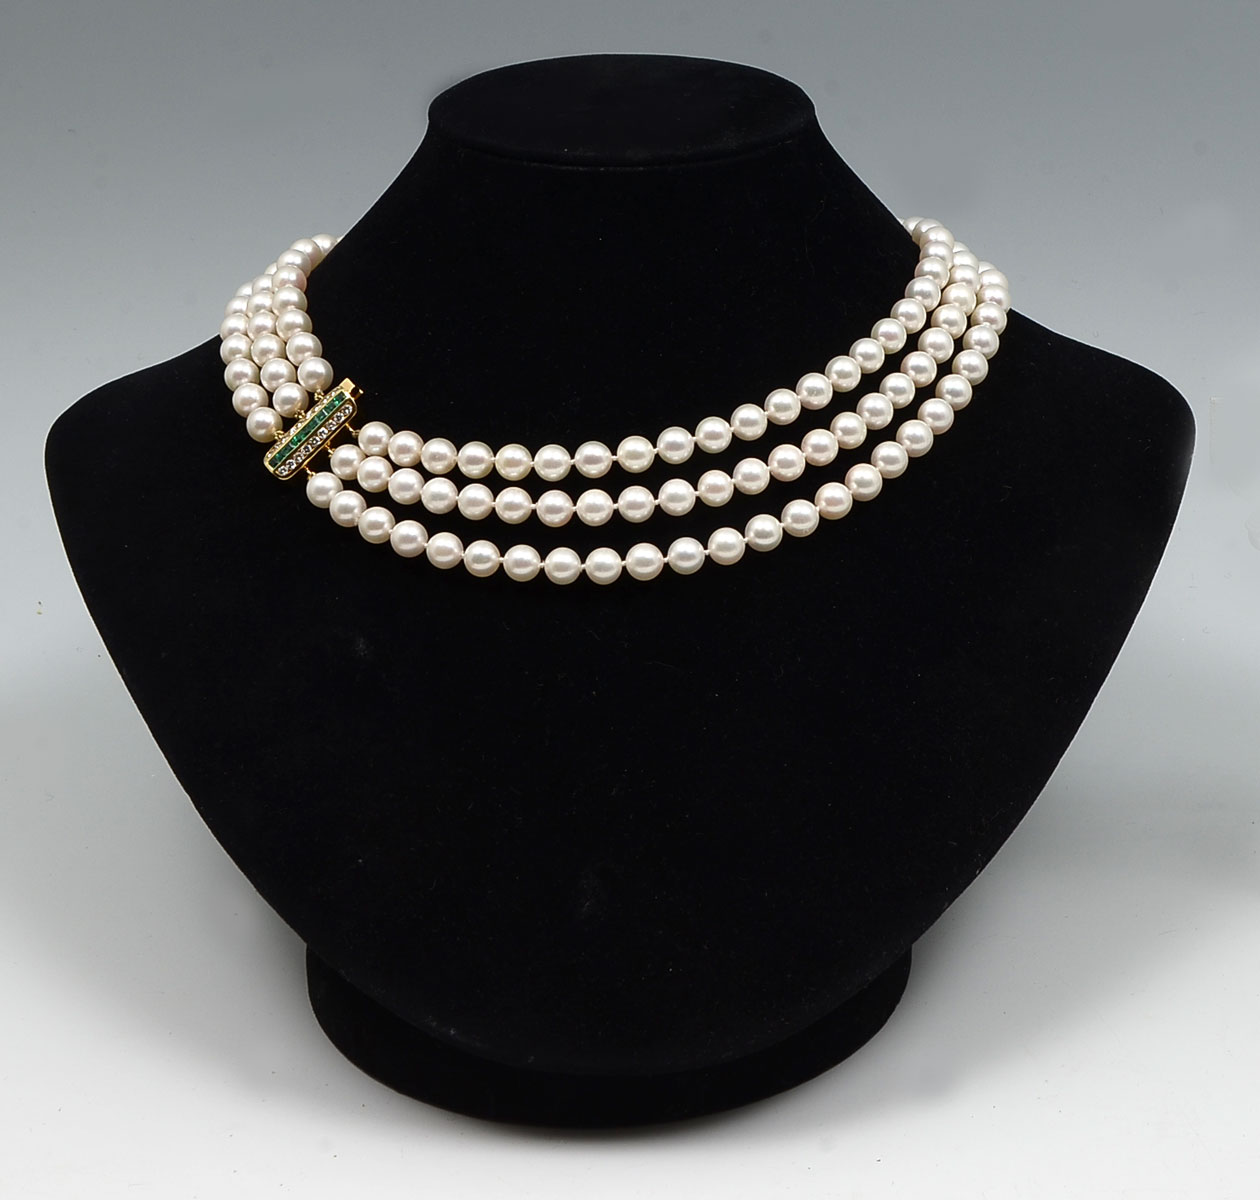 3 STRAND PEARL NECKLACE WITH 18K